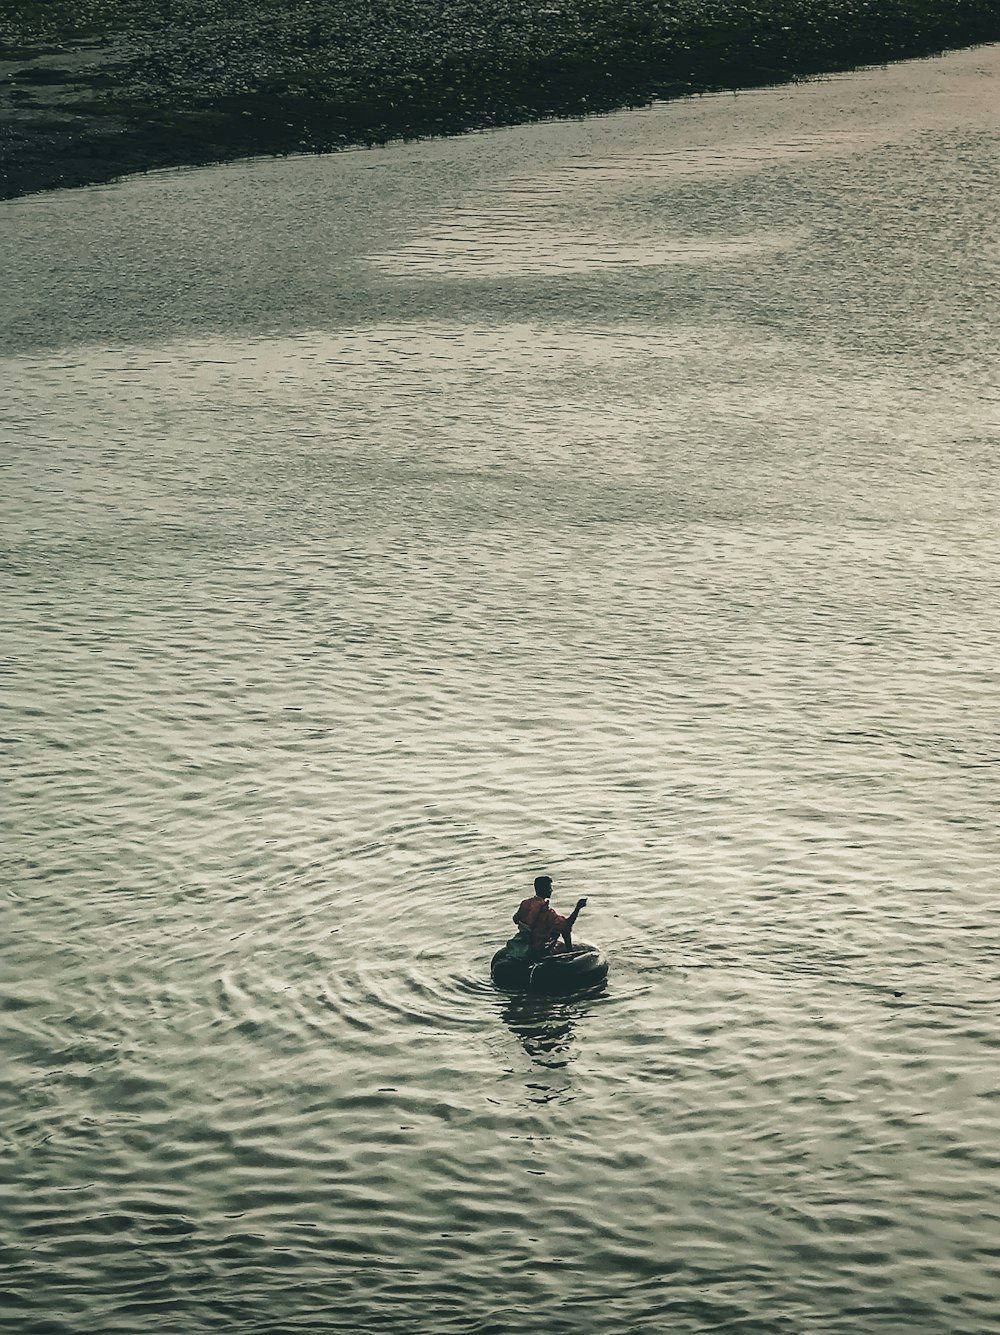 a person in a small boat on a body of water